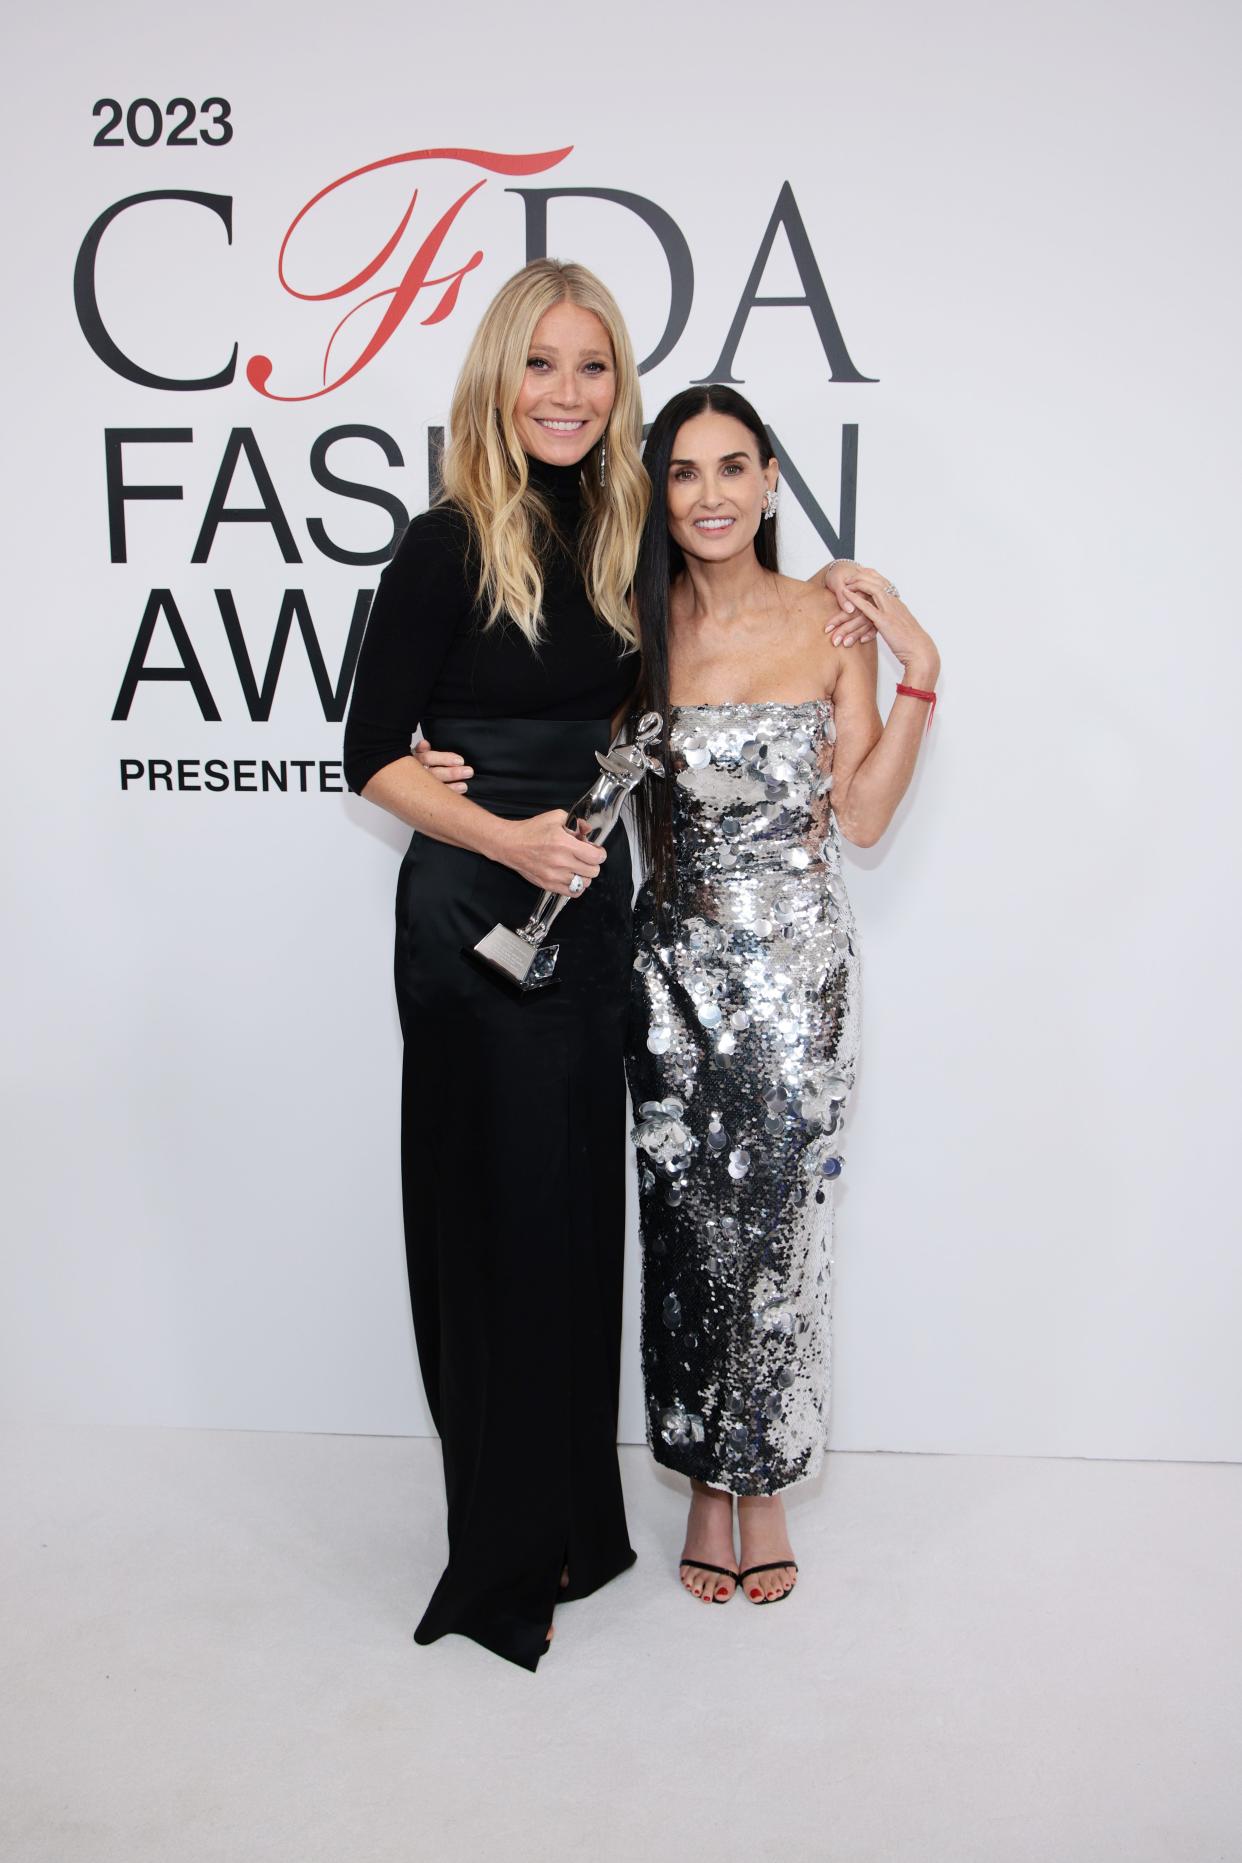 Gwyneth Paltrow and Demi Moore pose together at the CFDA Fashion Awards at the American Museum of Natural History on Monday in New York City.